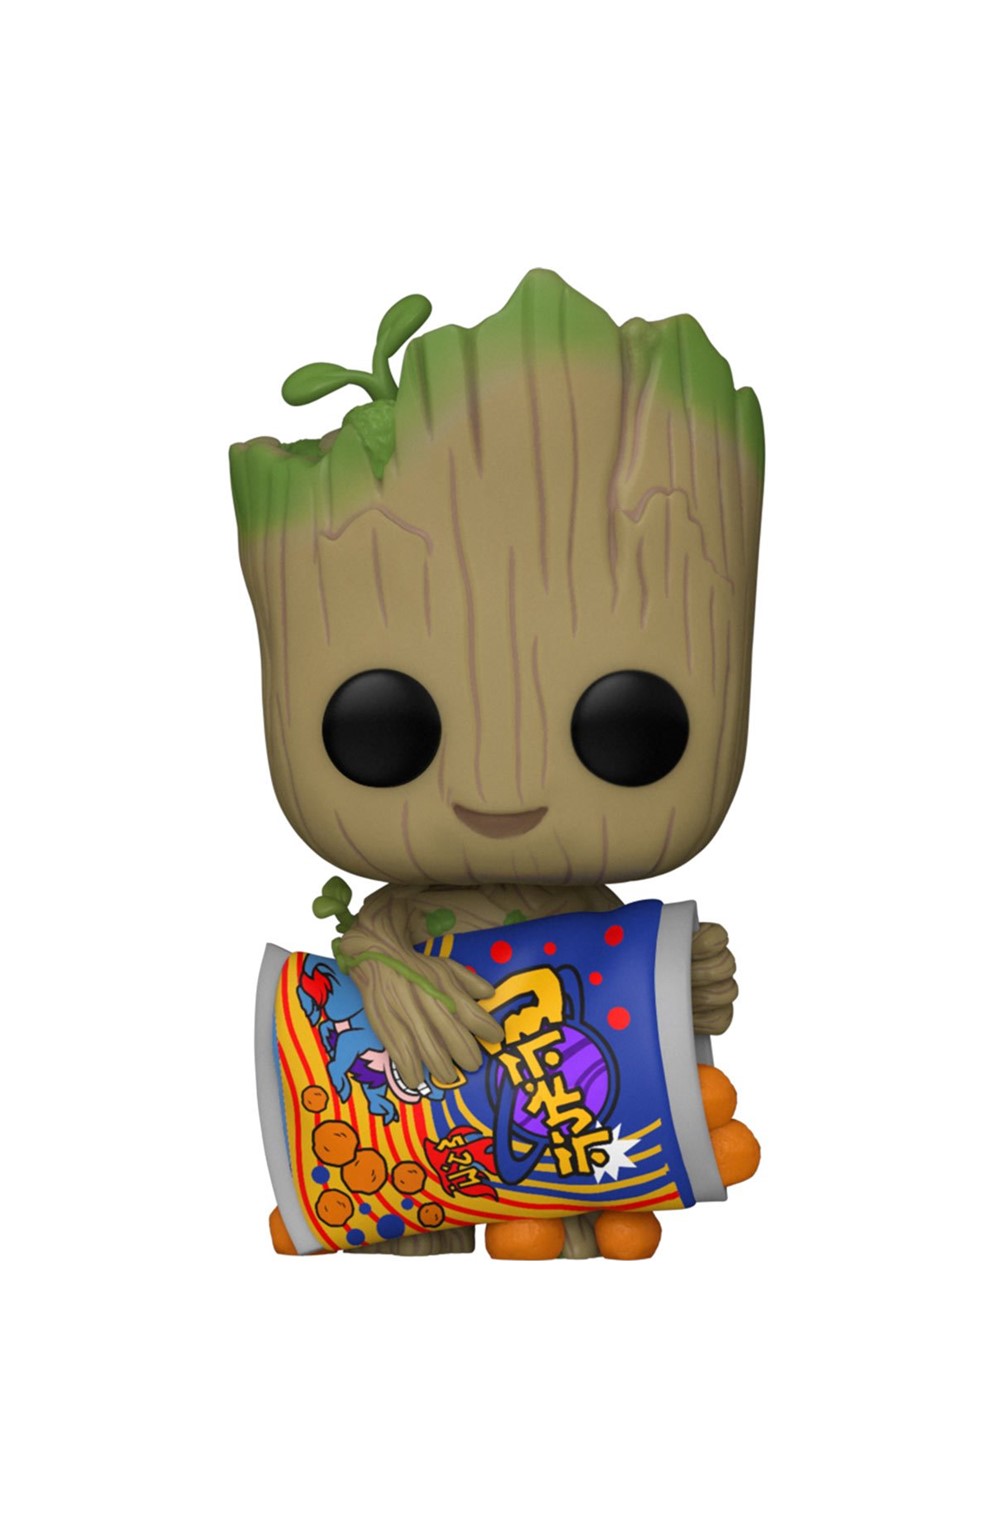 I Am Groot With Cheese Puffs Pop! Vinyl Figure